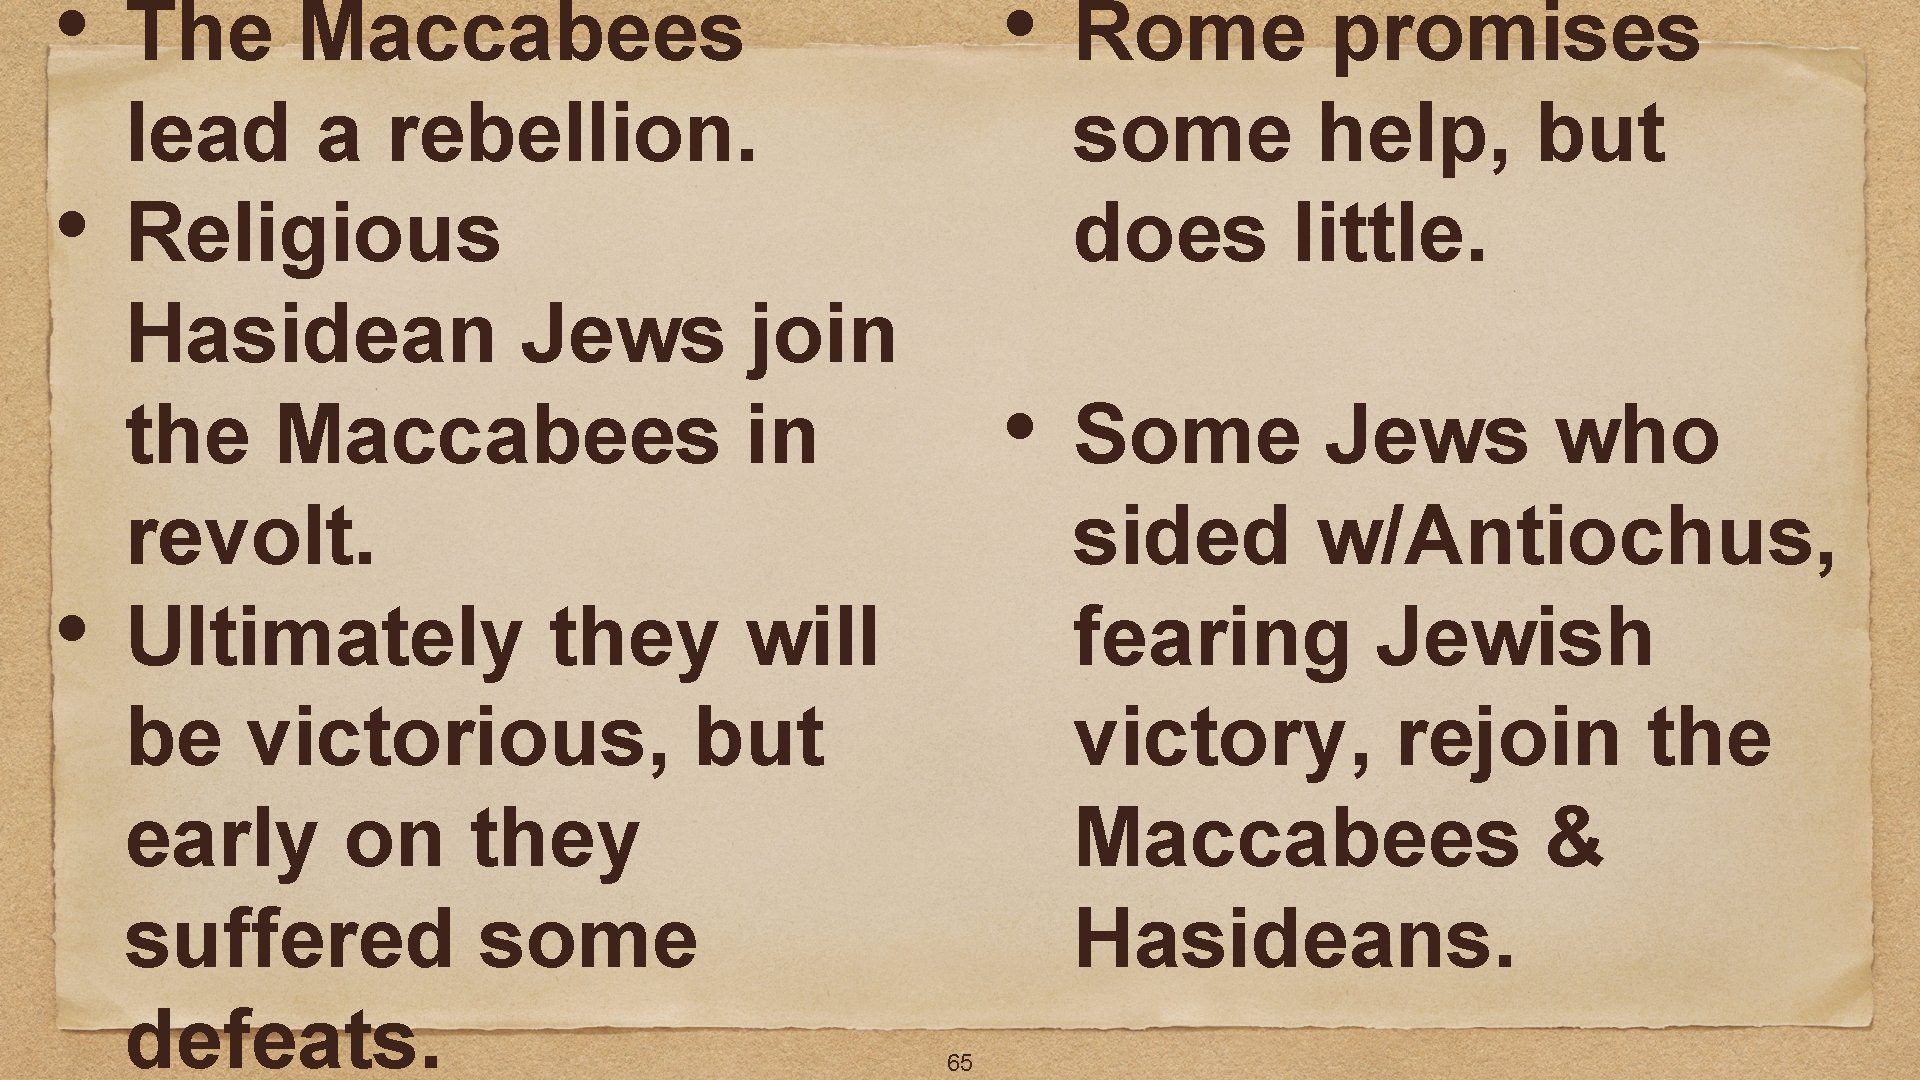  • • • The Maccabees lead a rebellion. Religious Hasidean Jews join the